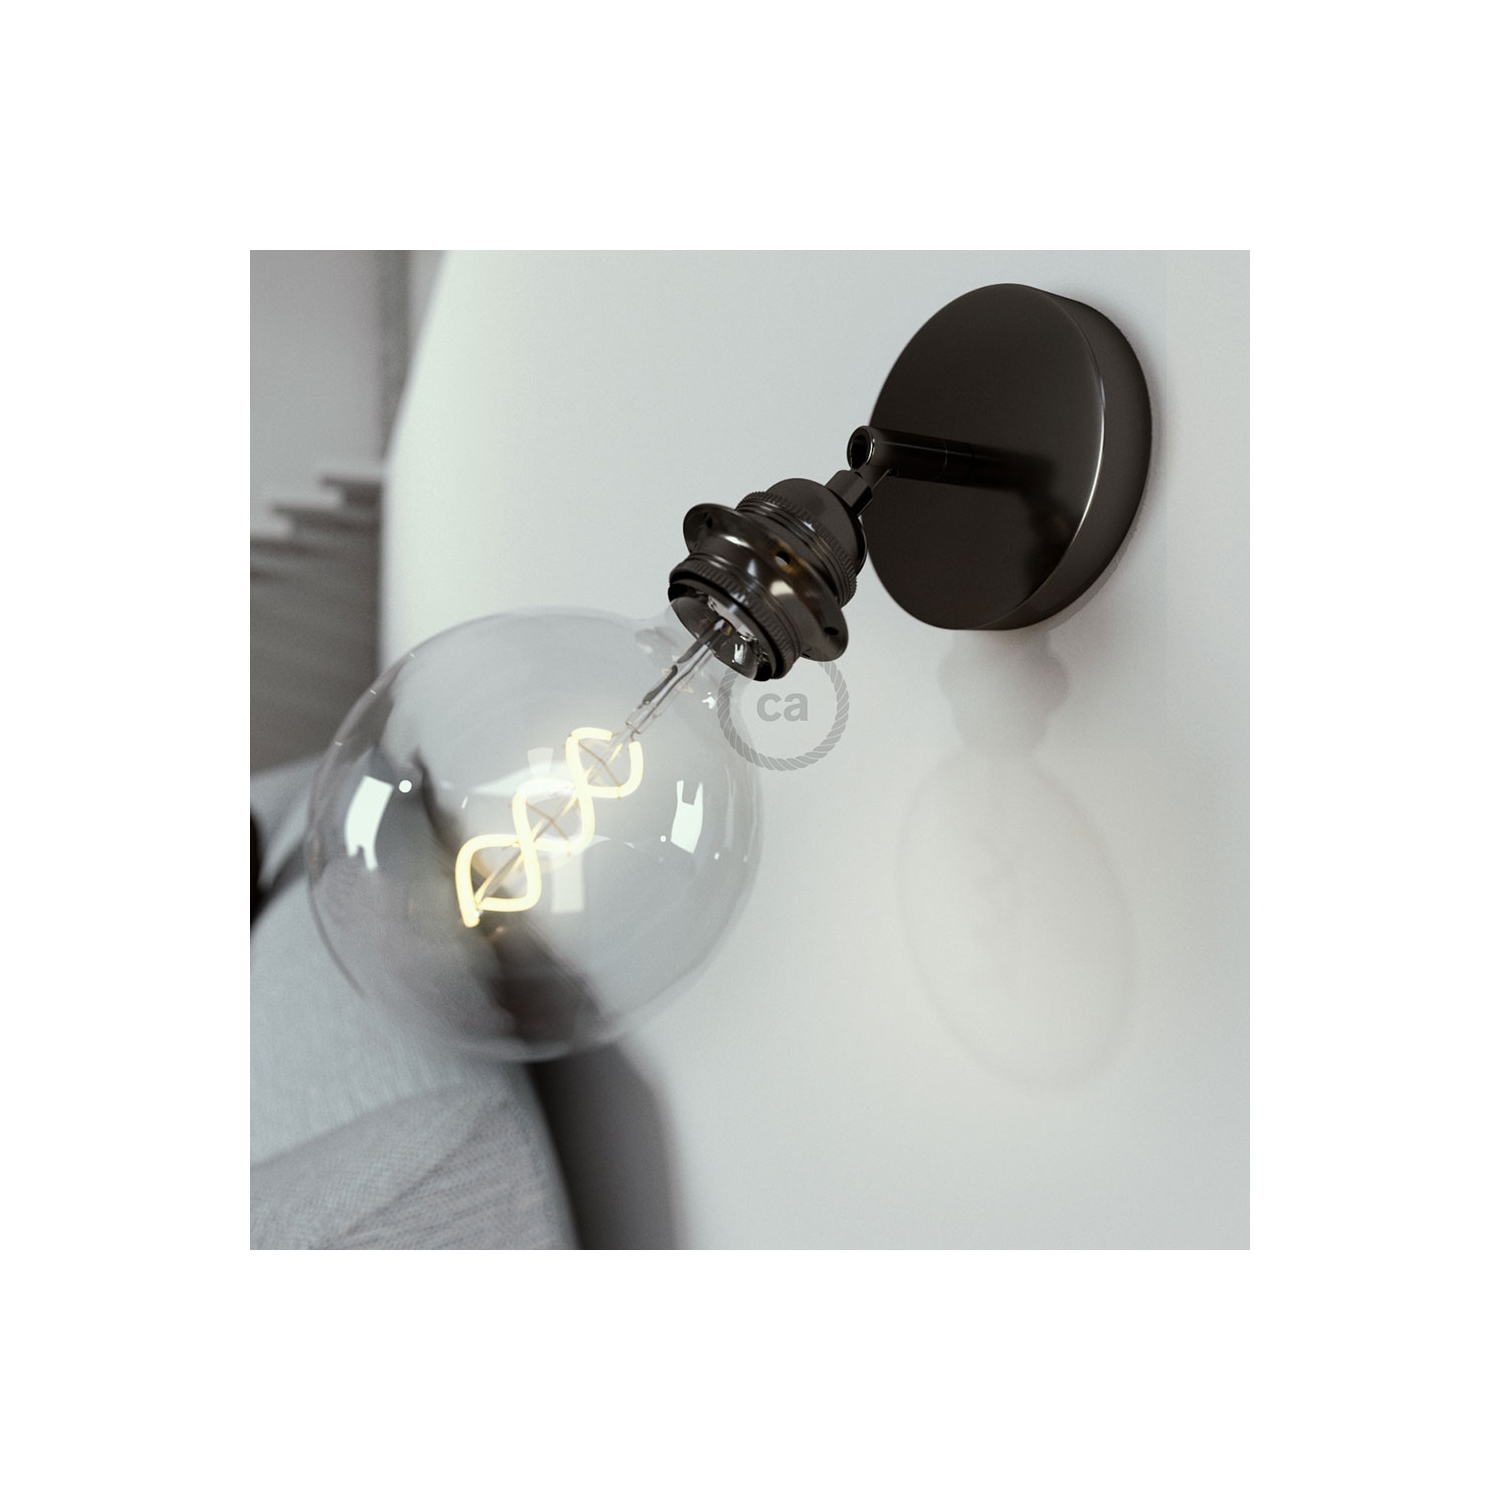 Fermaluce Metallo 90° Black Pearl adjustable, with E26 threaded lamp holder, the metal wall or ceiling light source